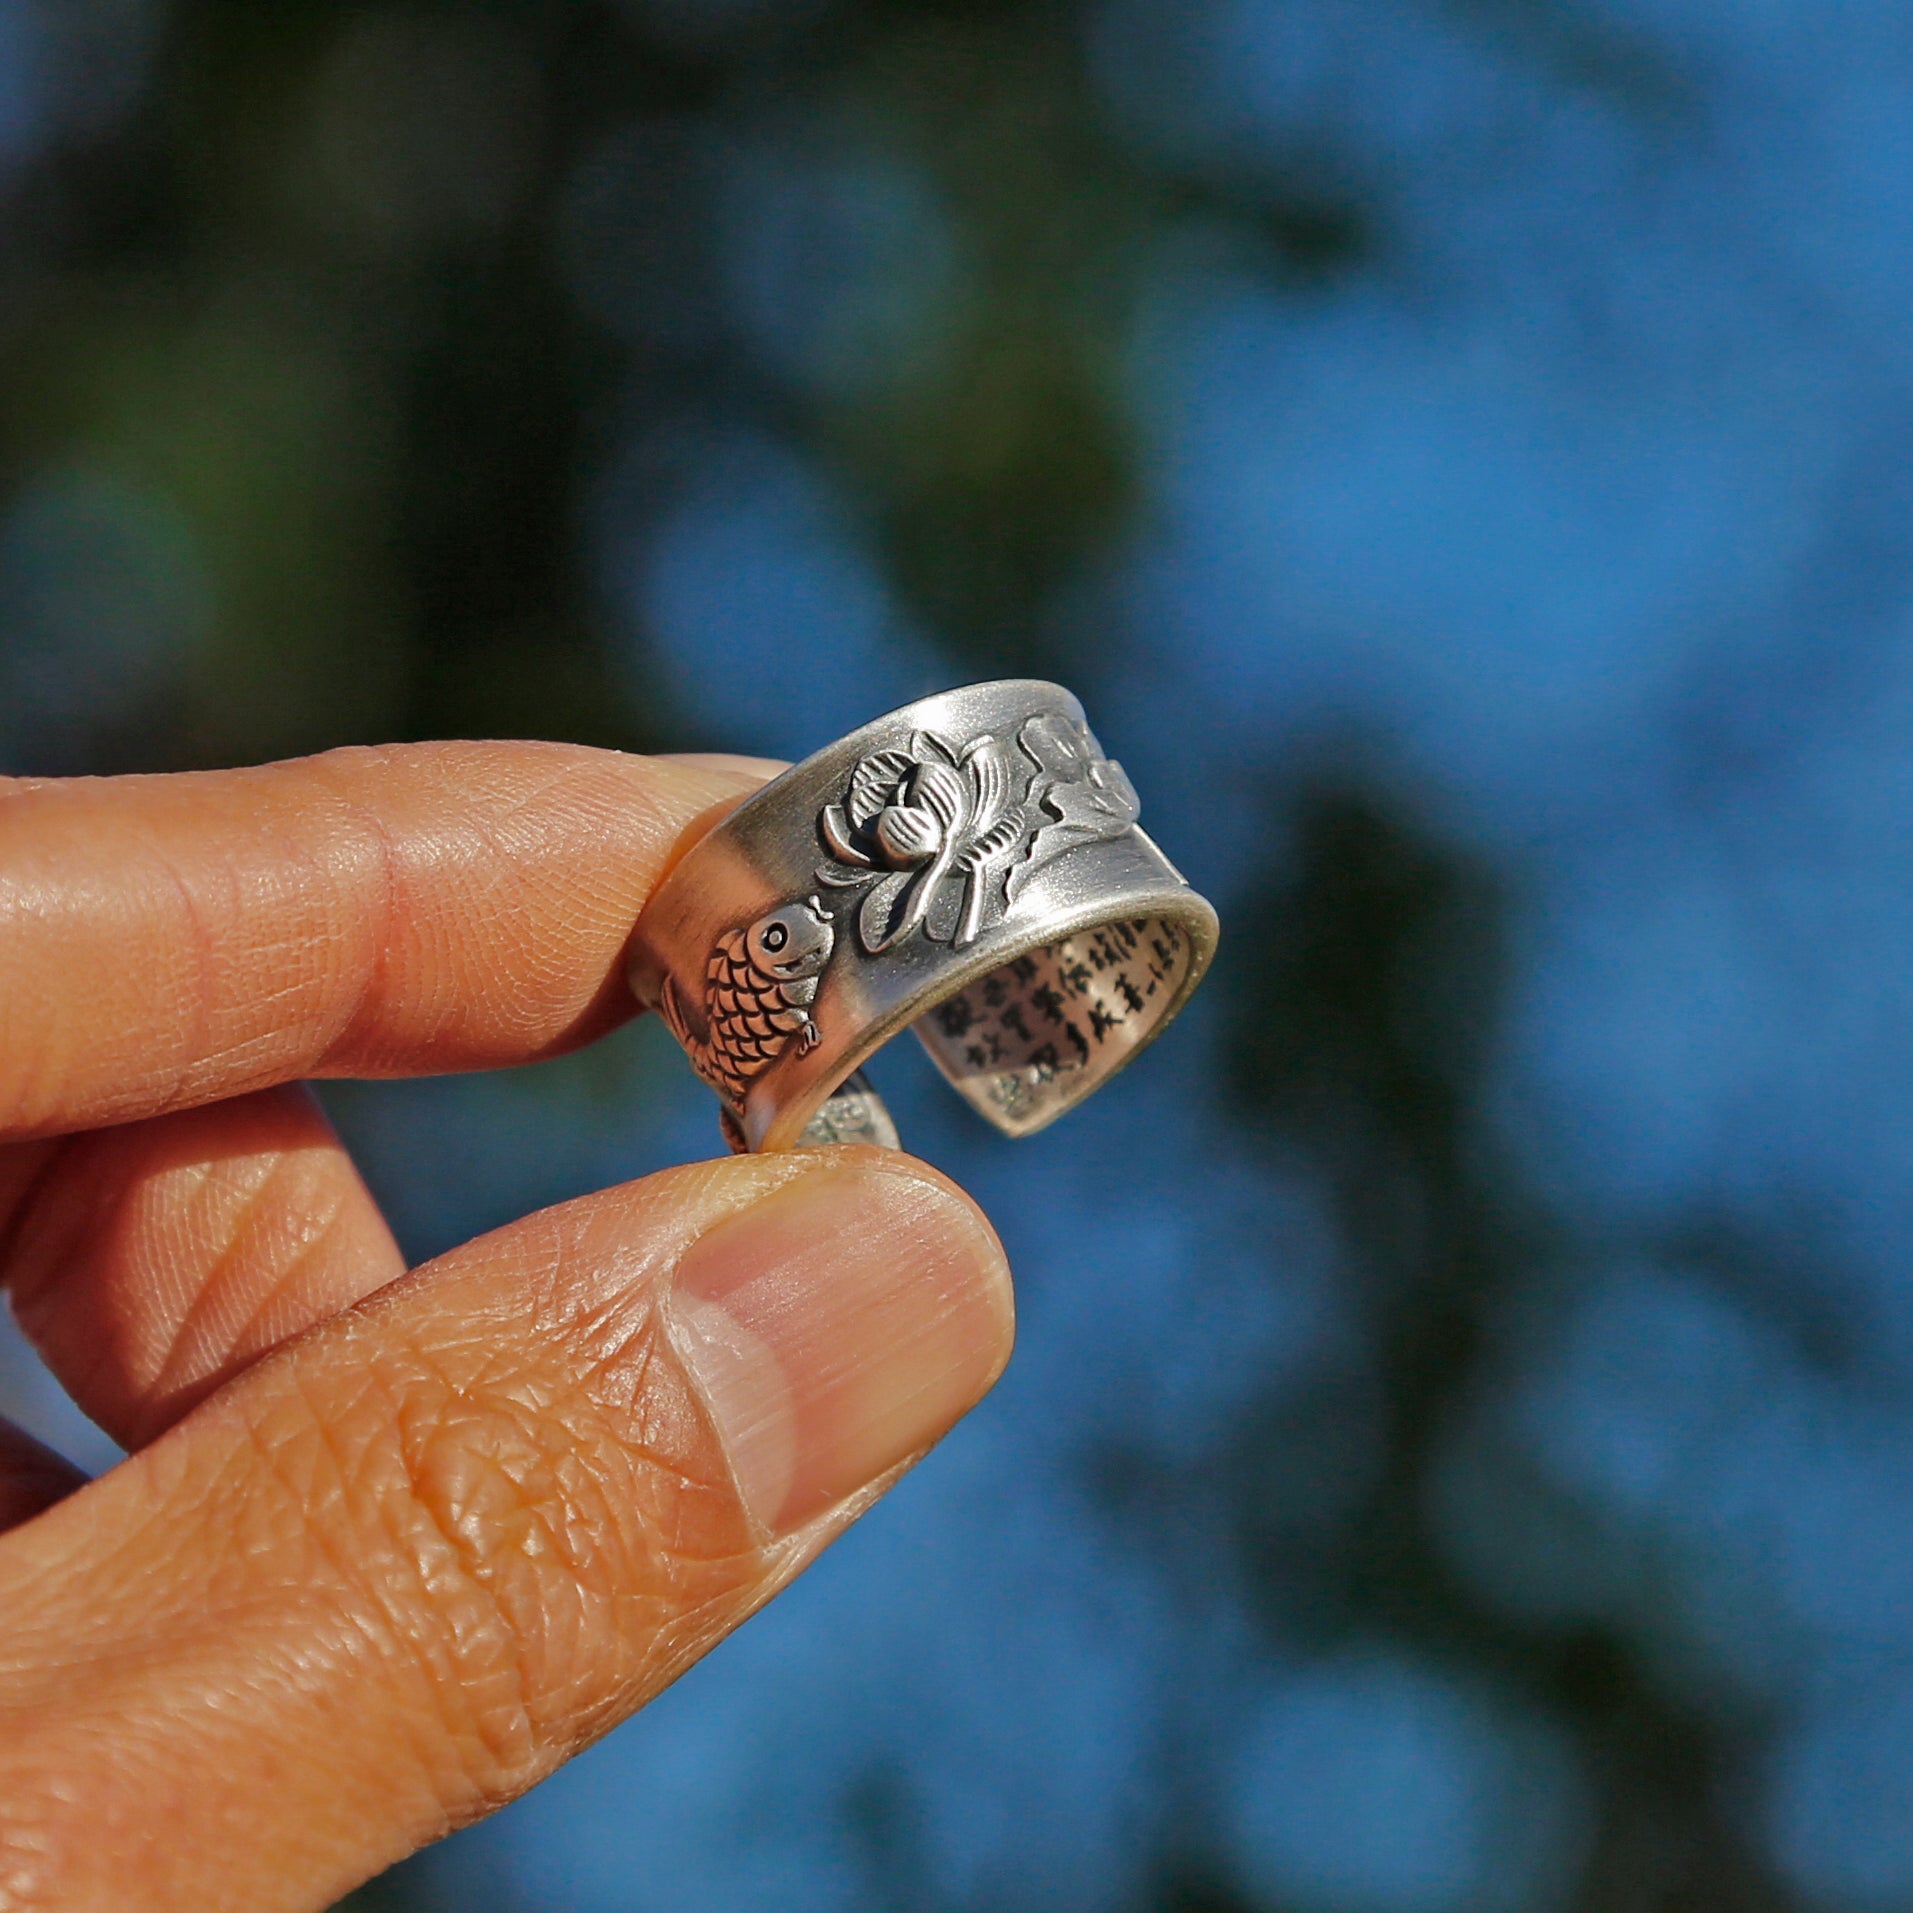 Vintage Silver Mens Ring with King Motif » Anitolia